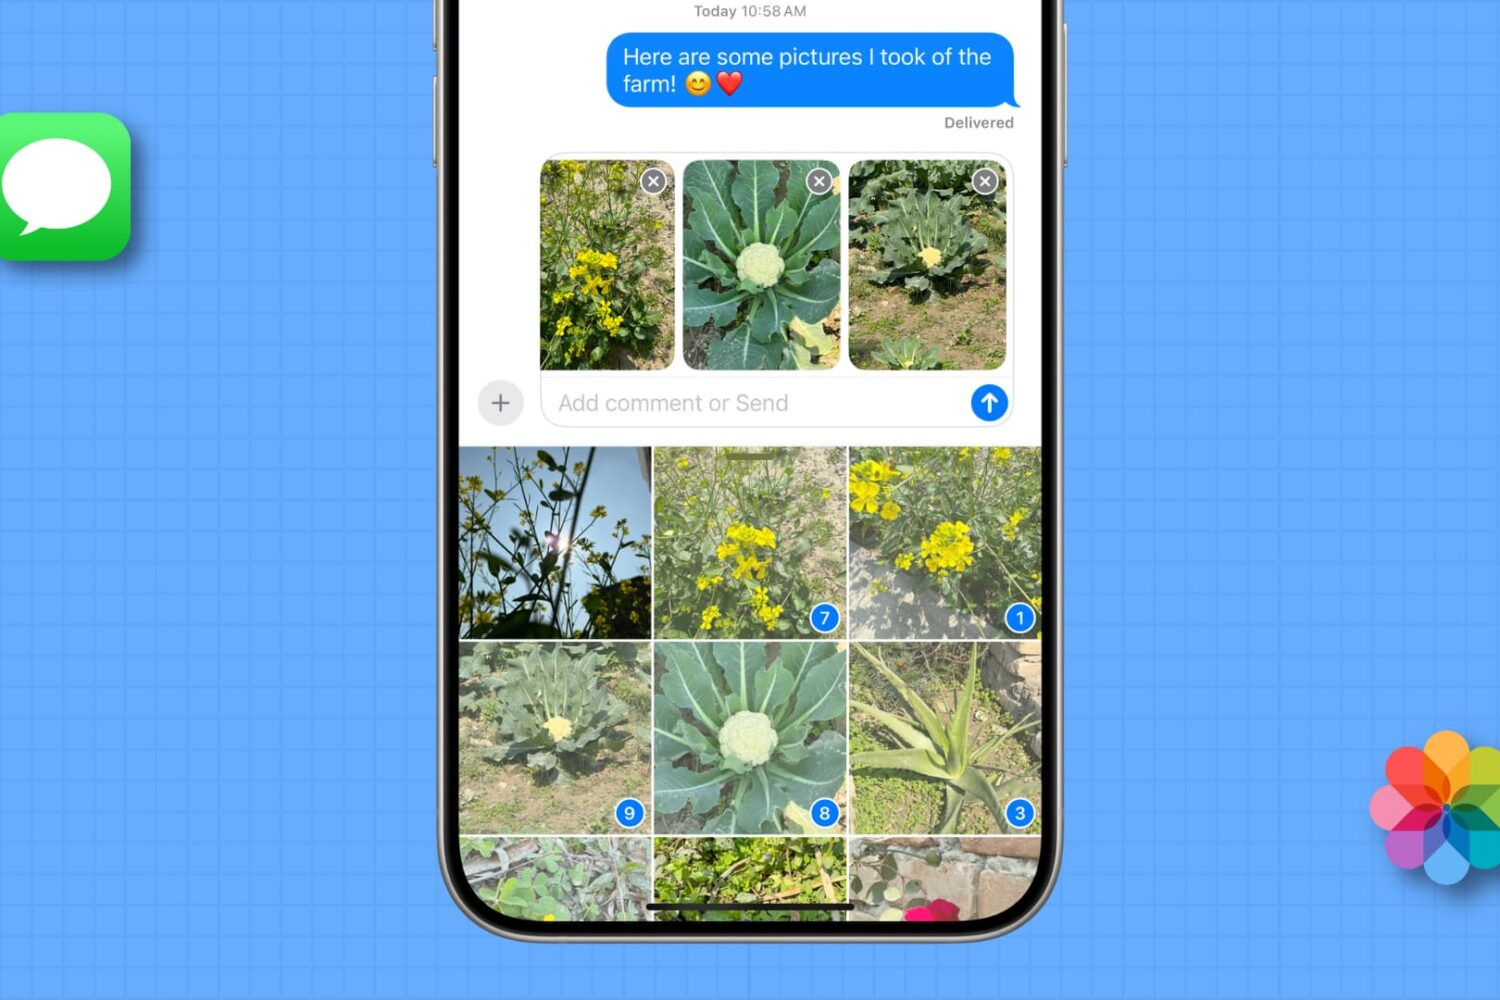 Sending photos using the Messages app on iPhone